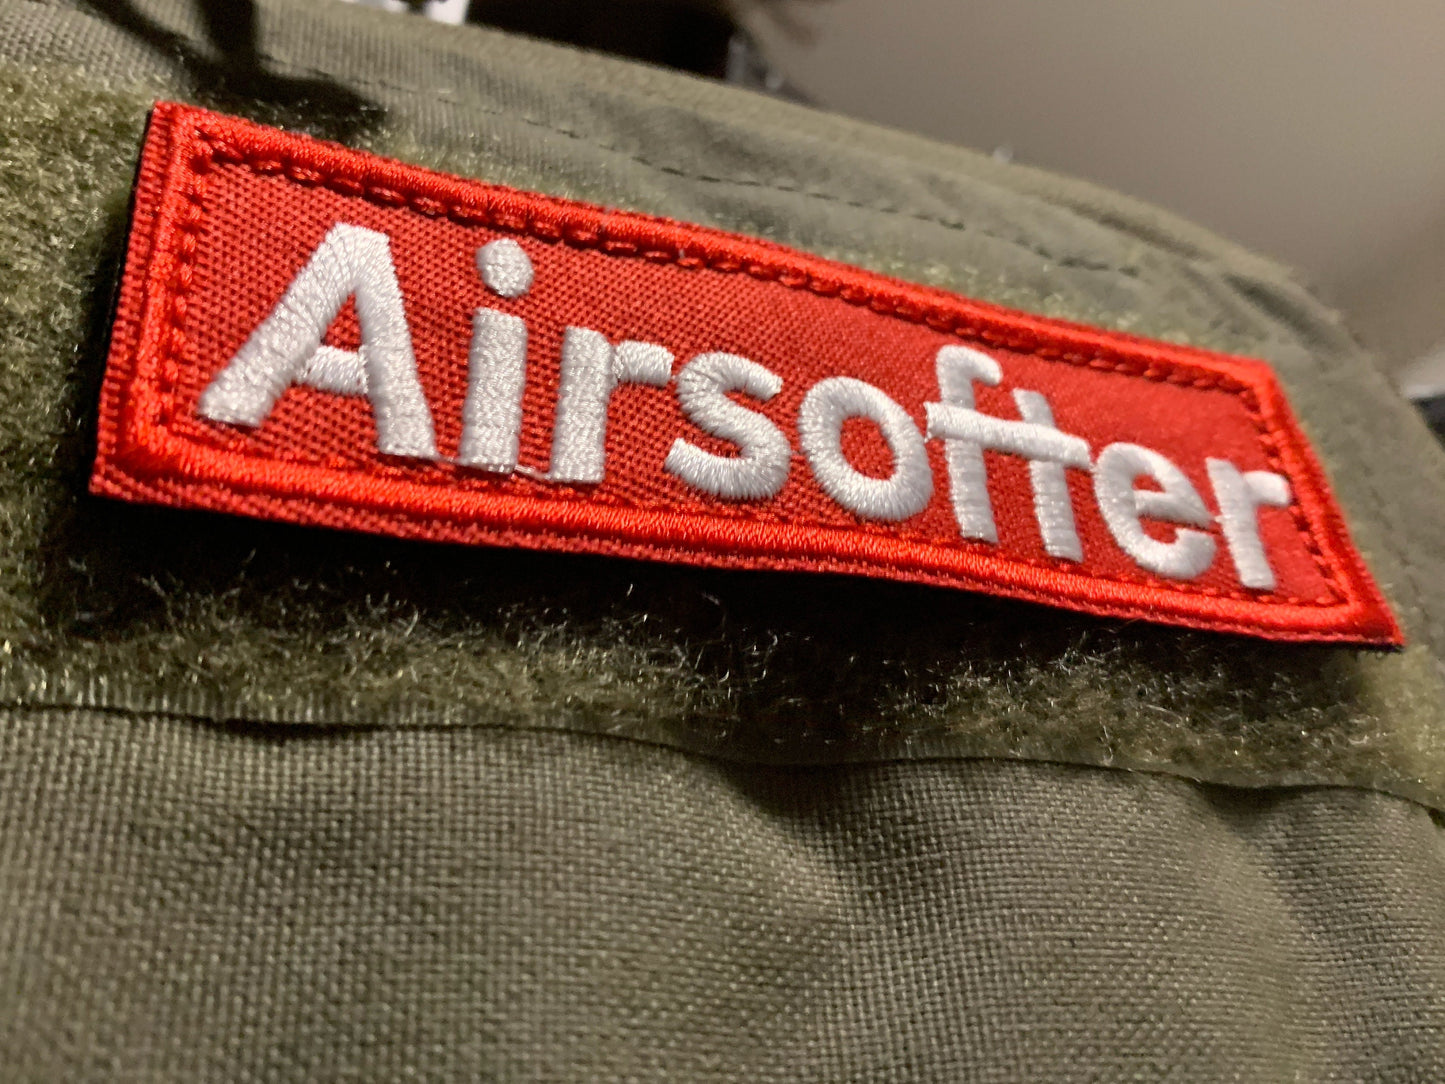 Airsofter Operator Yeet Send It Airsoft Meme Patch